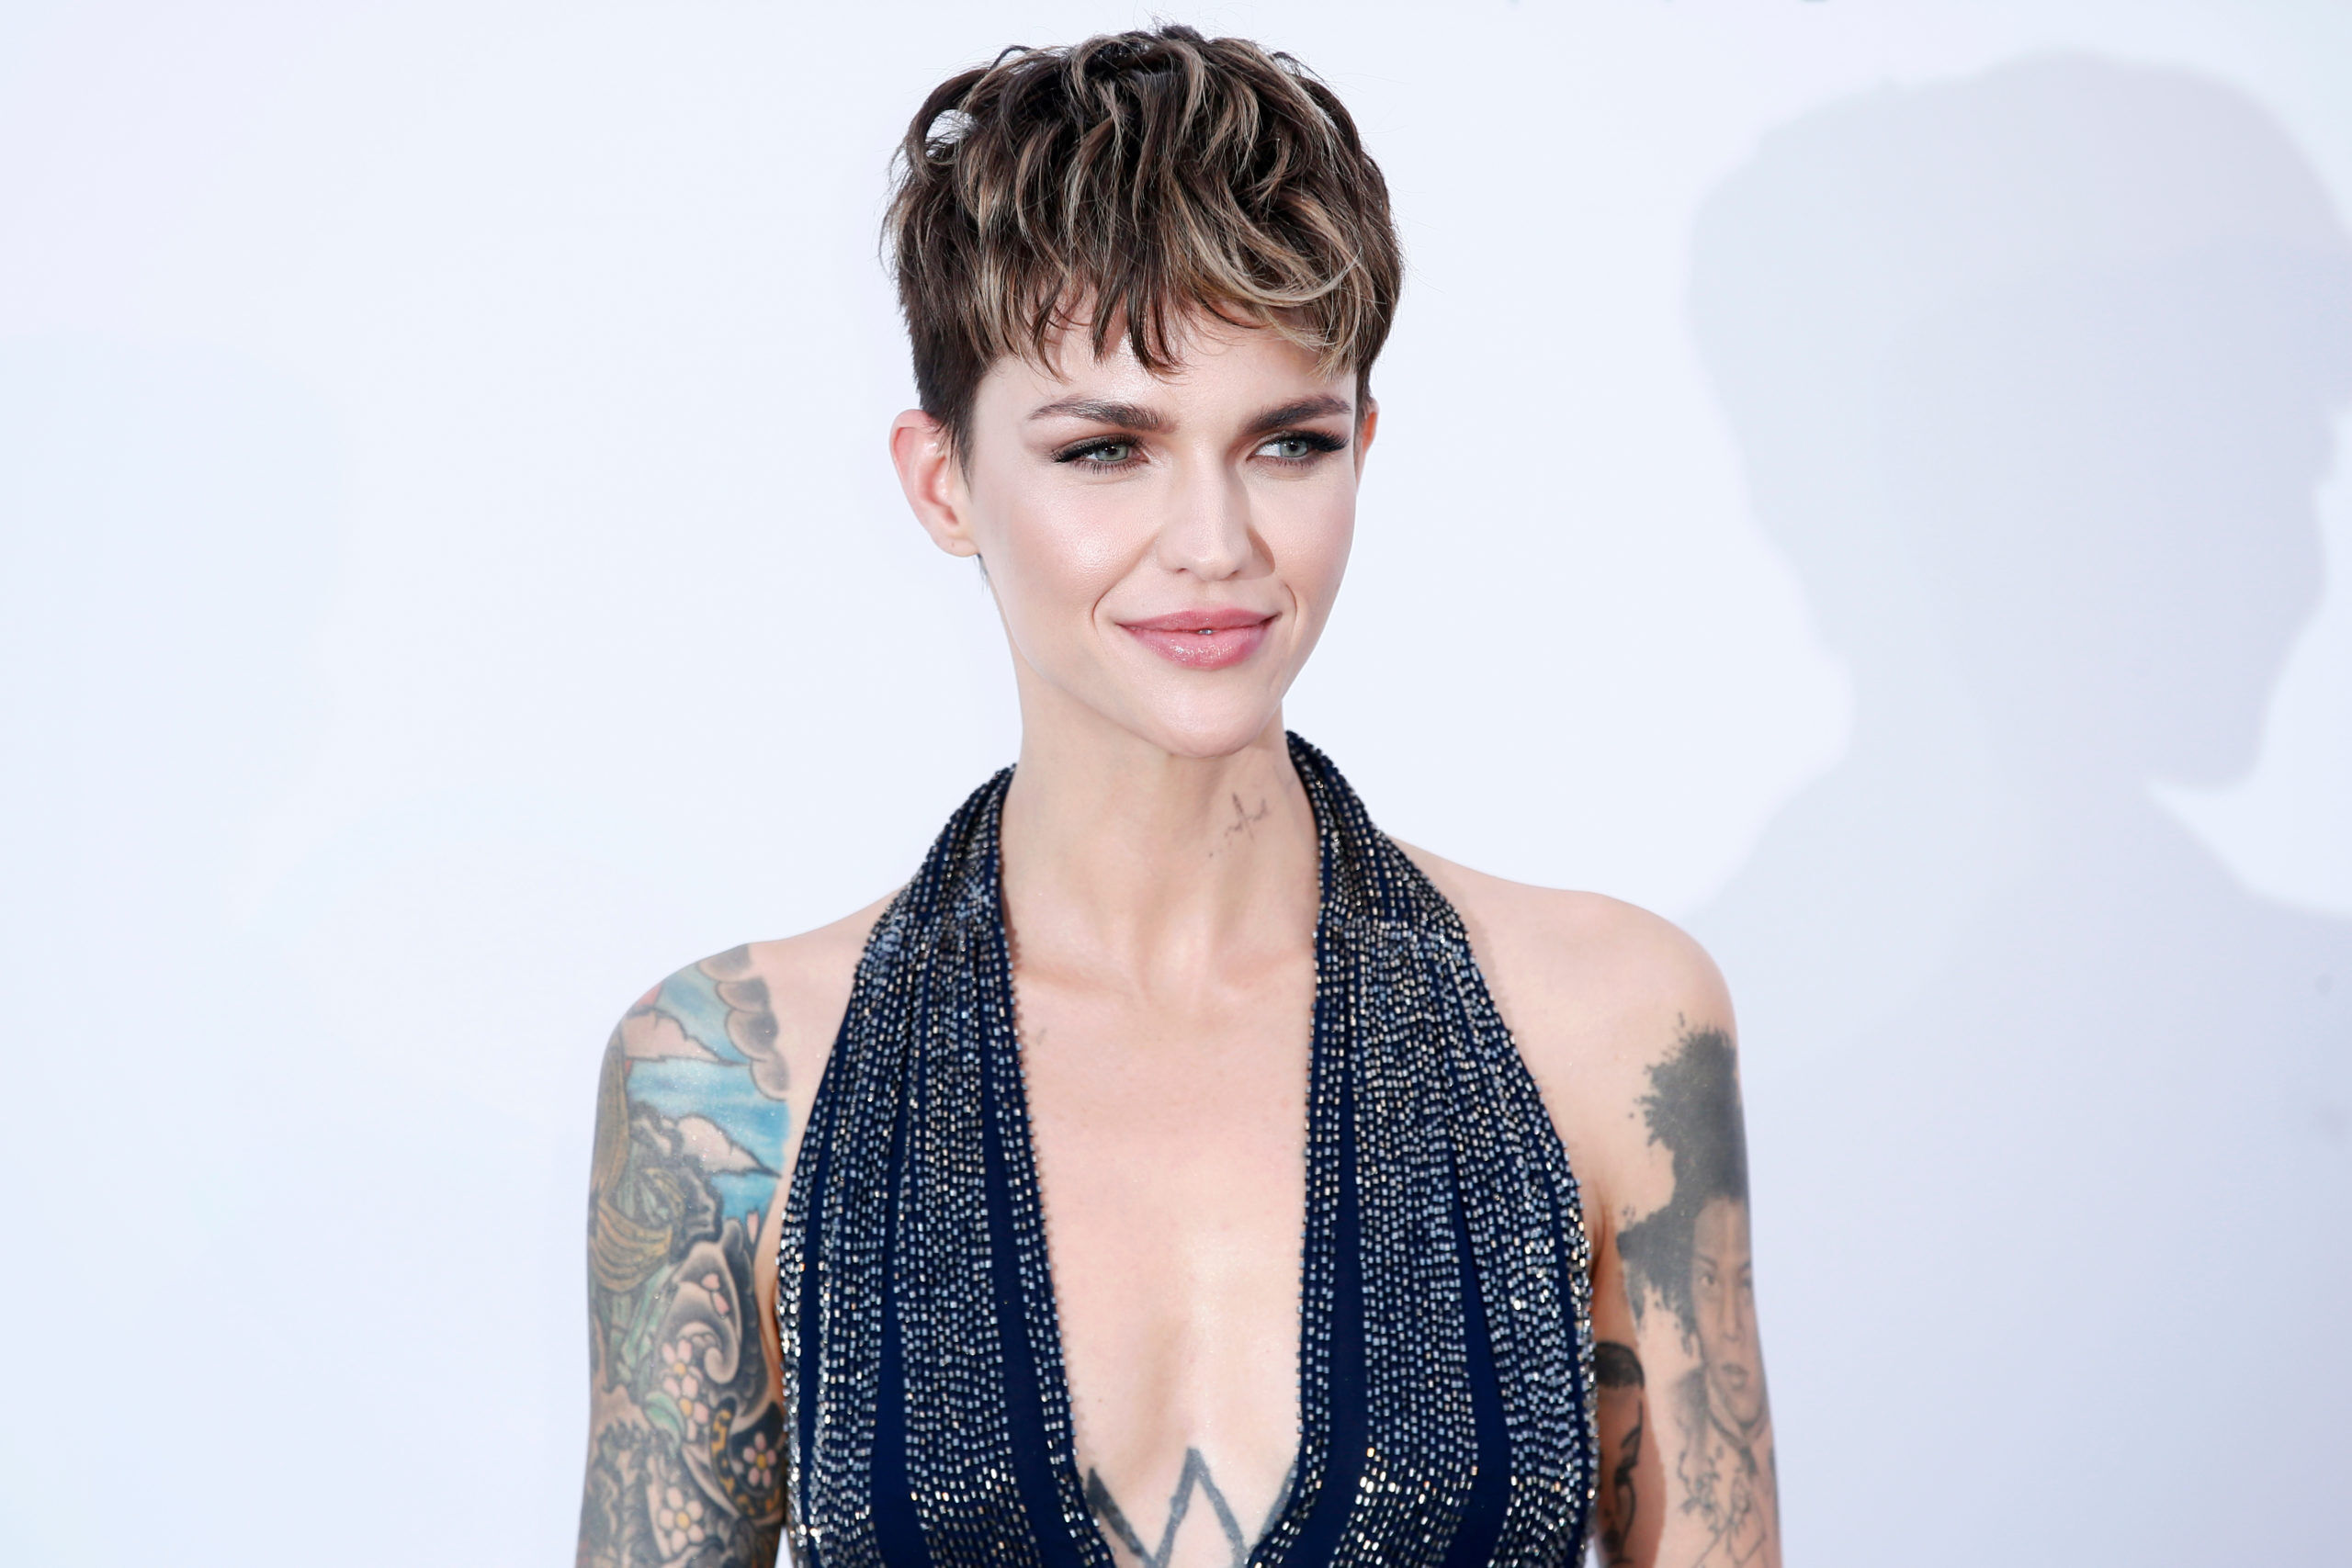 CAP D'ANTIBES, FRANCE - MAY 17: Ruby Rose arrives at the amfAR Gala Cannes 2018 at Hotel du Cap-Eden-Roc on May 17, 2018 in Cap d'Antibes, France.